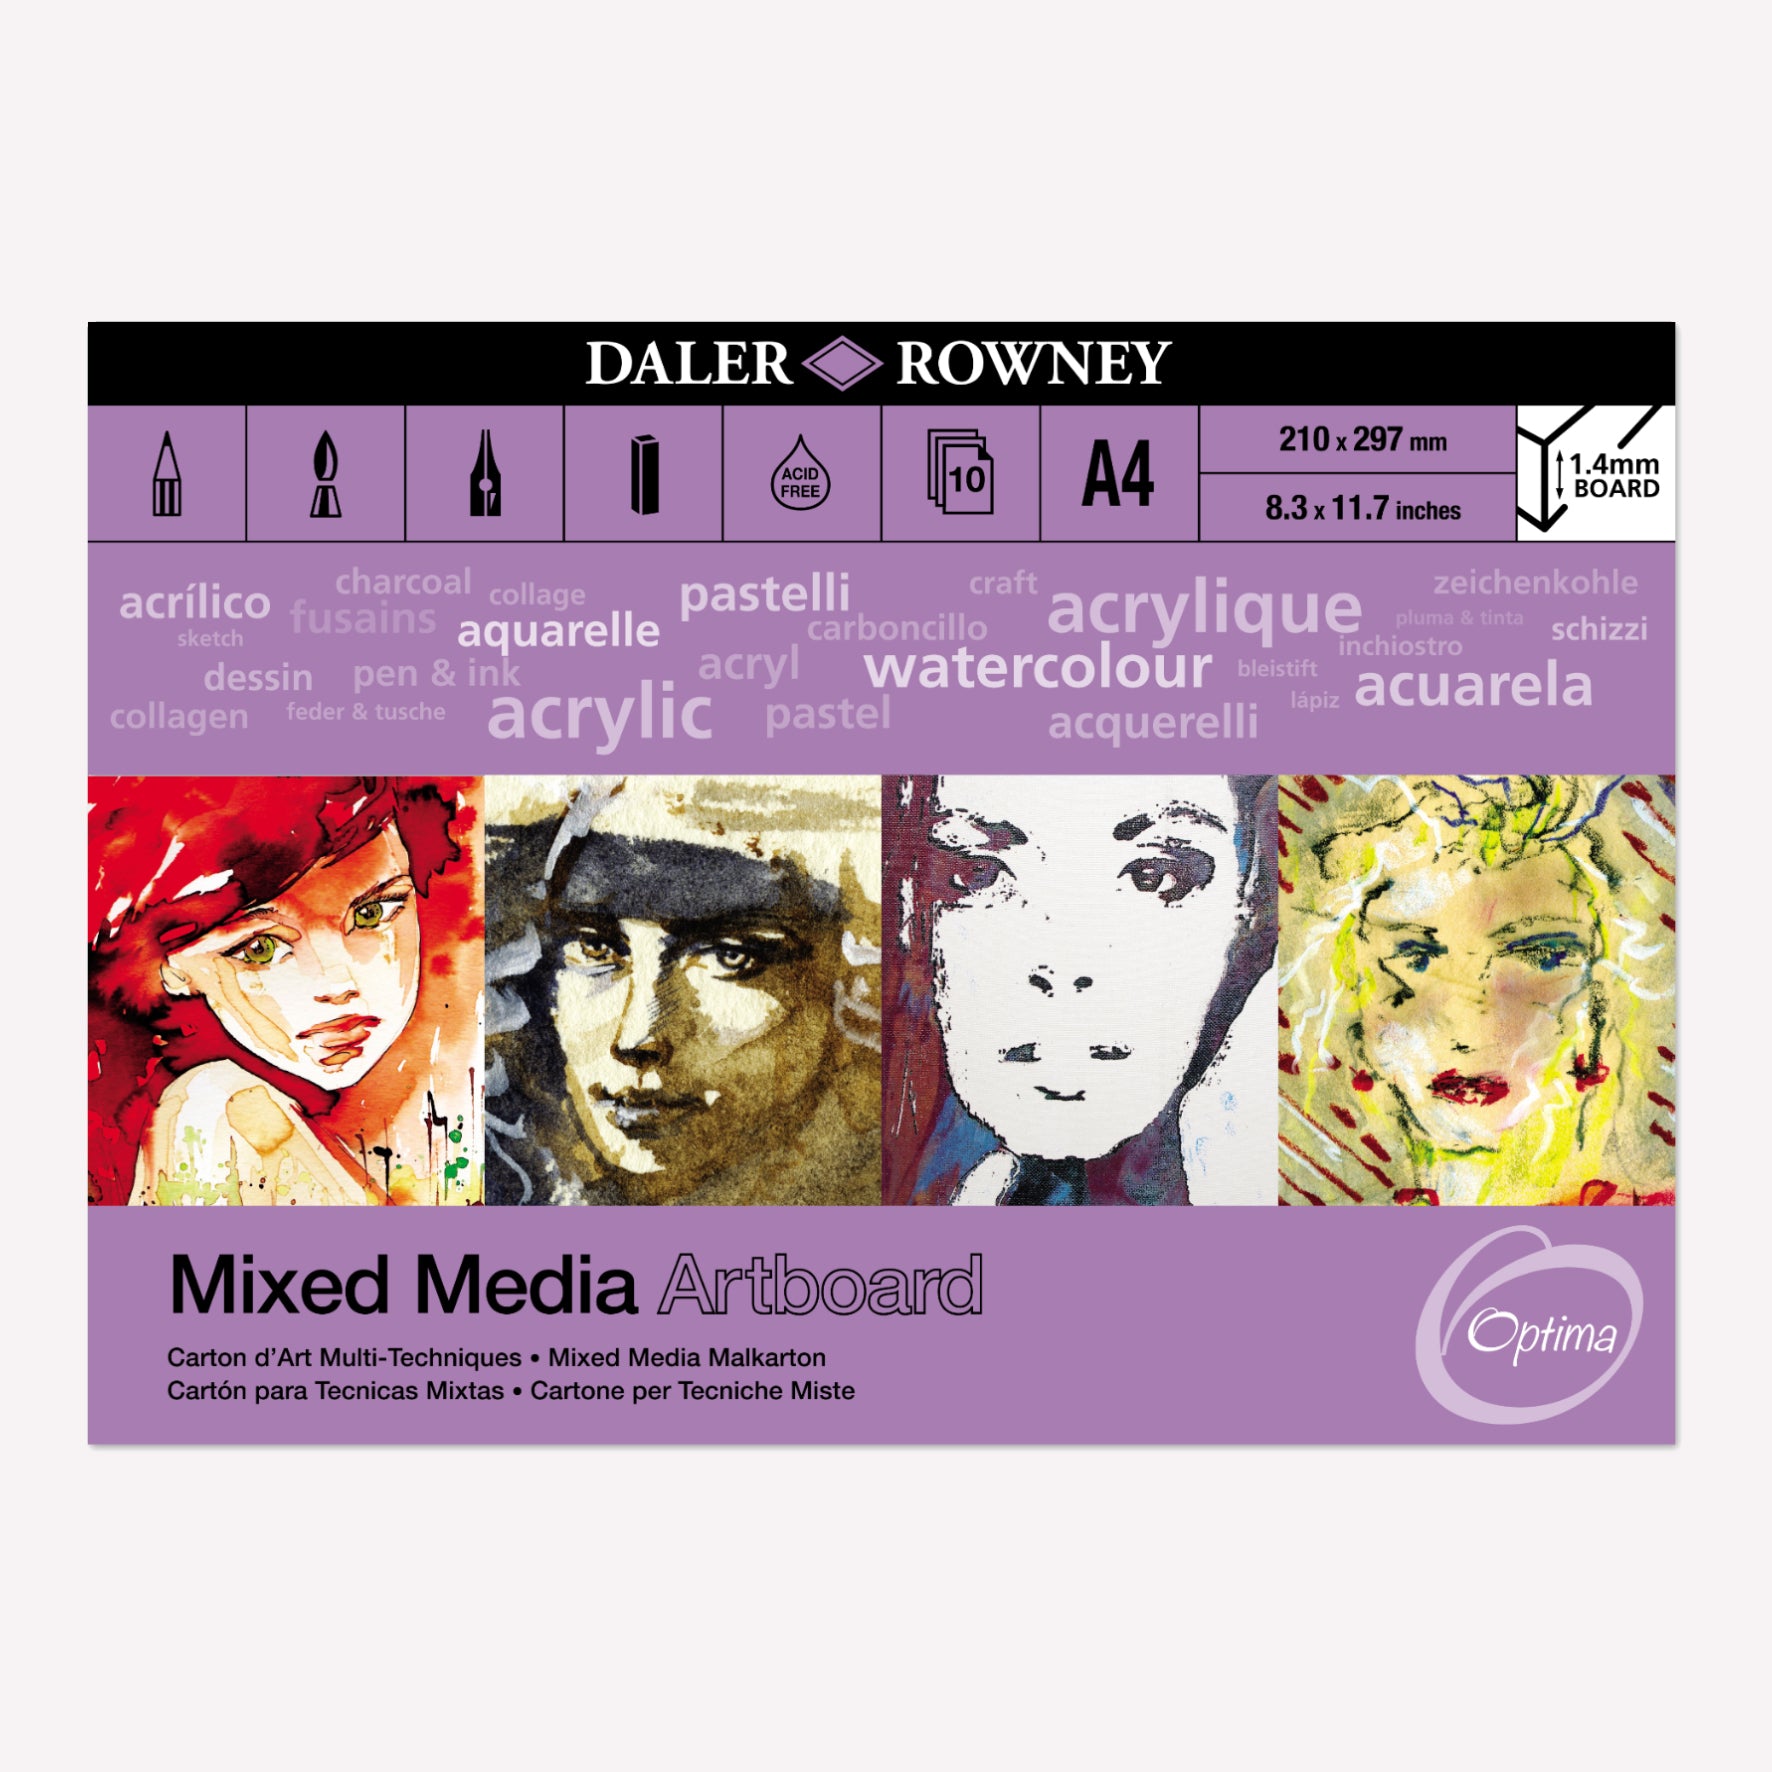 Daler-Rowney A4 Mixed Media Artboard gummed pad featuring a sturdy purple cover illustrated with portraits in different styles. 